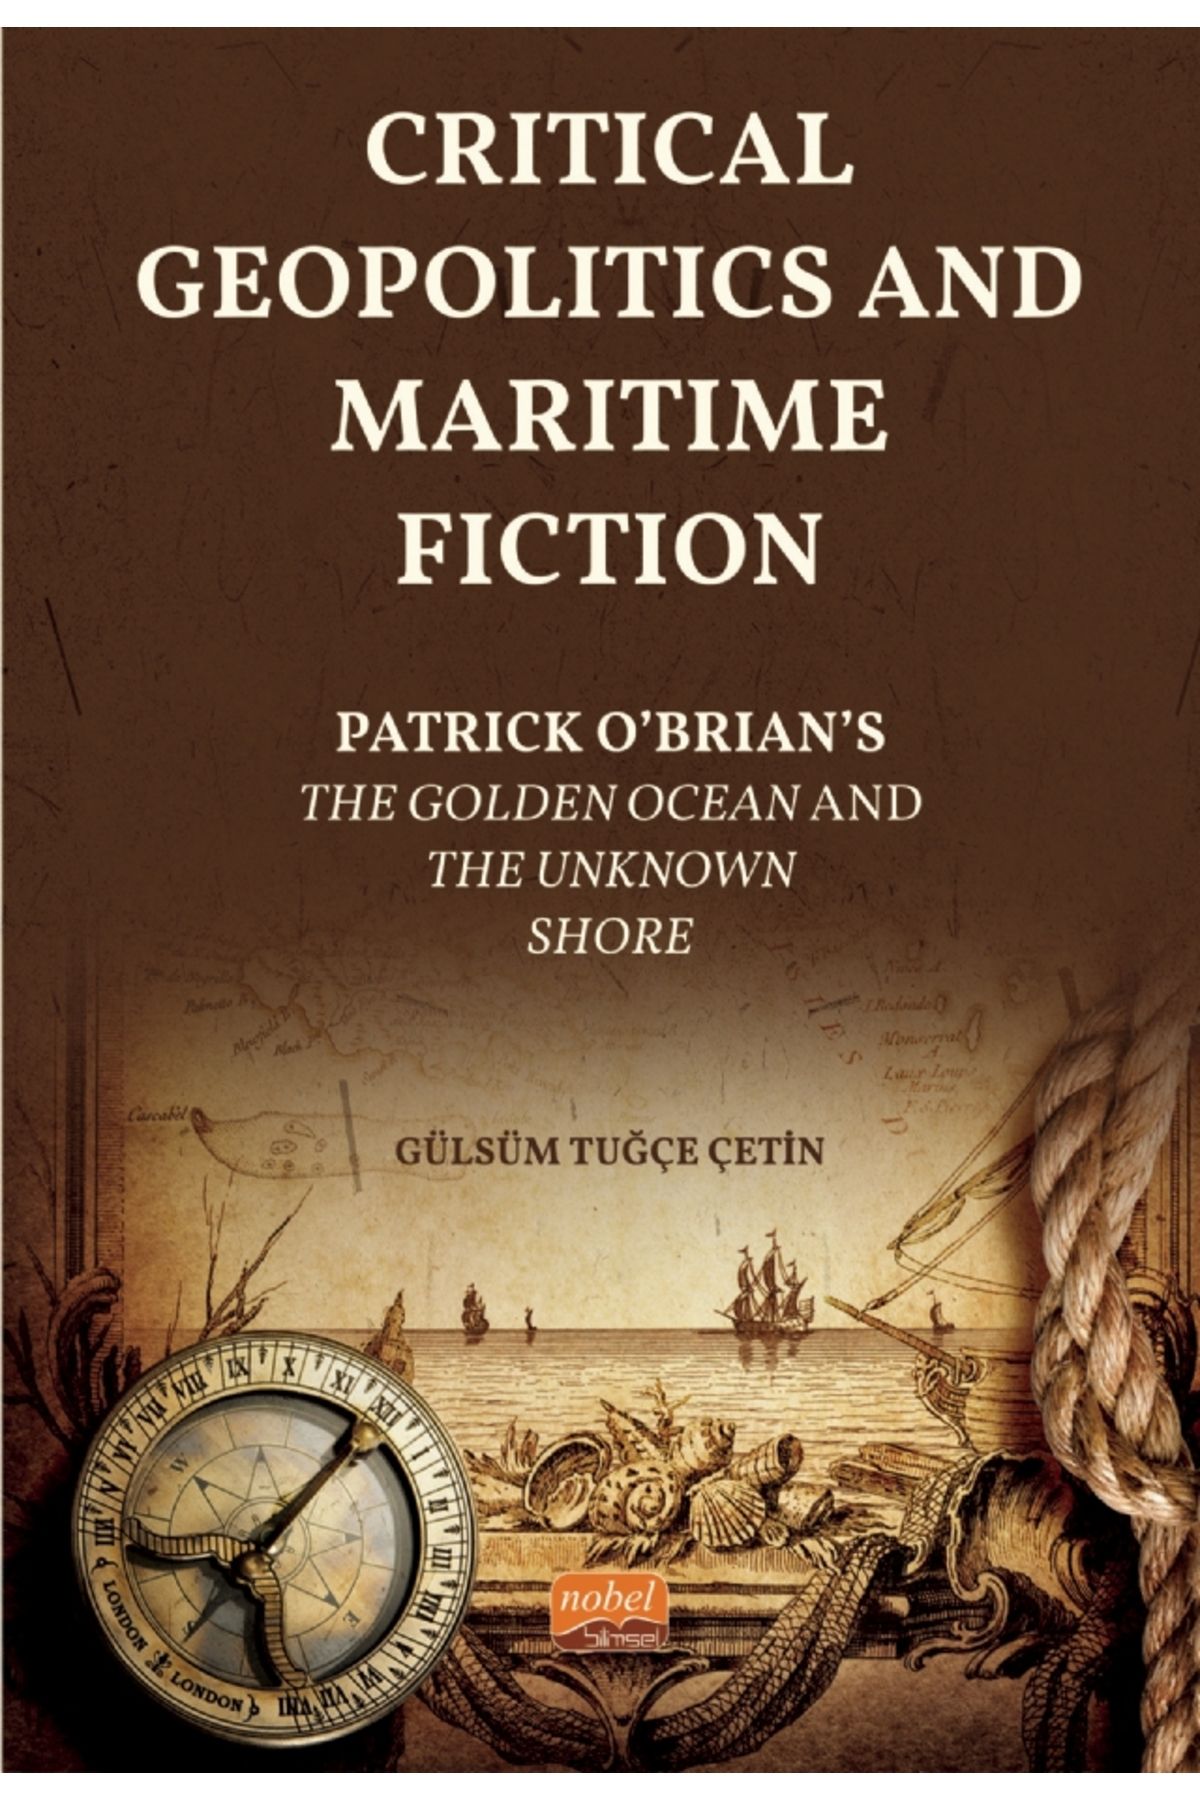 Nobel Bilimsel Eserler CRITICAL GEOPOLITICS AND MARITIME FICTION -  Patrick O’Brian’s  The Golden Ocean  and  The Unknown S